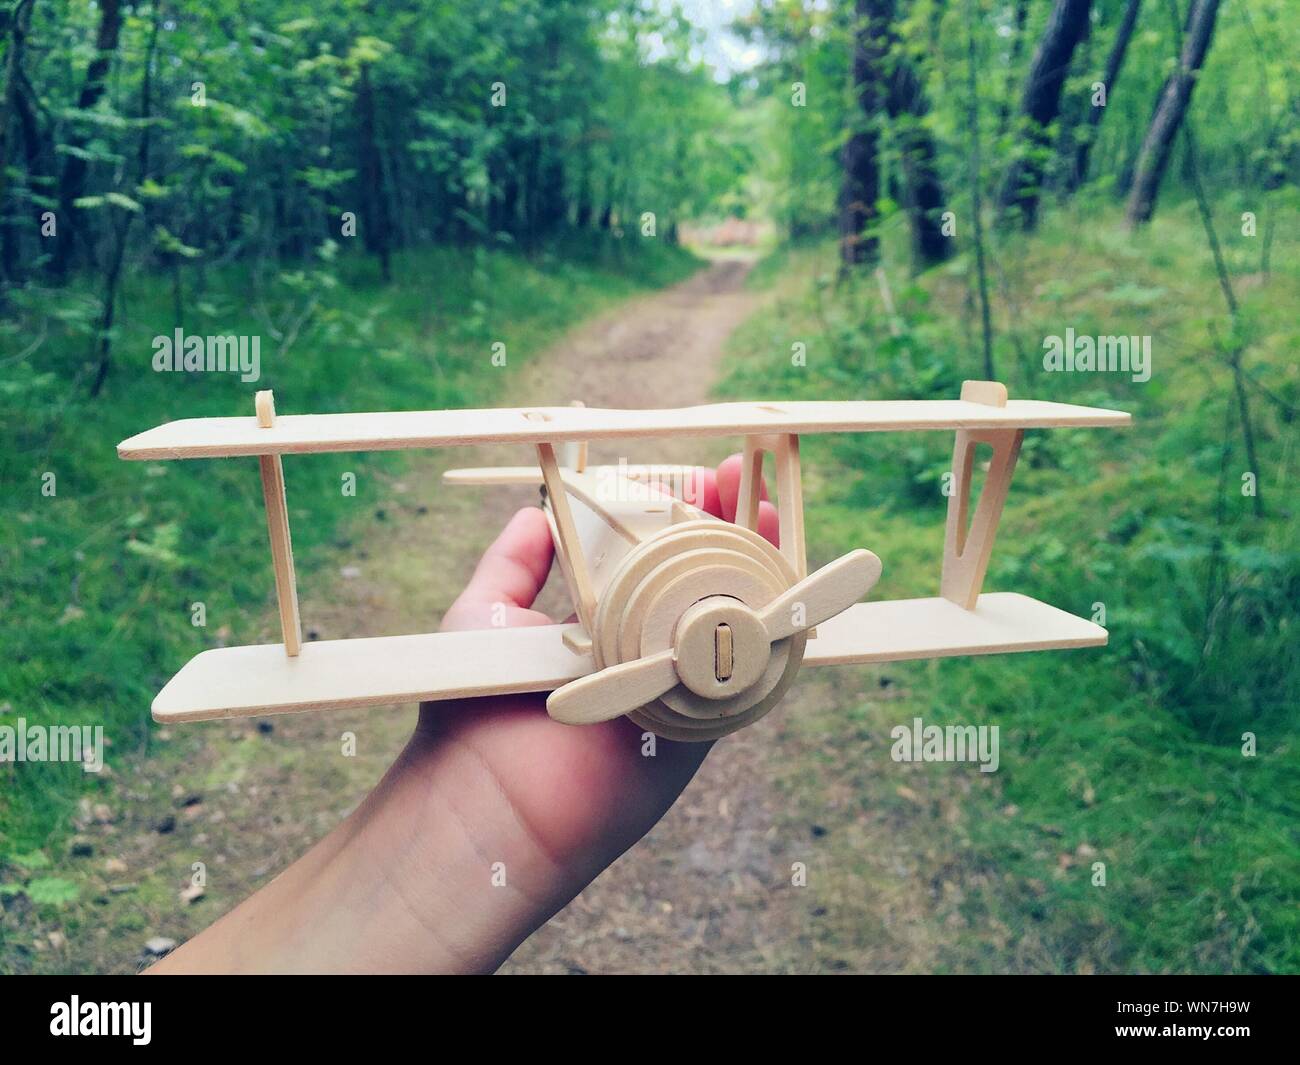 Cropped Image Of Person Holding Wooden Airplane Over Footpath In Forest Stock Photo